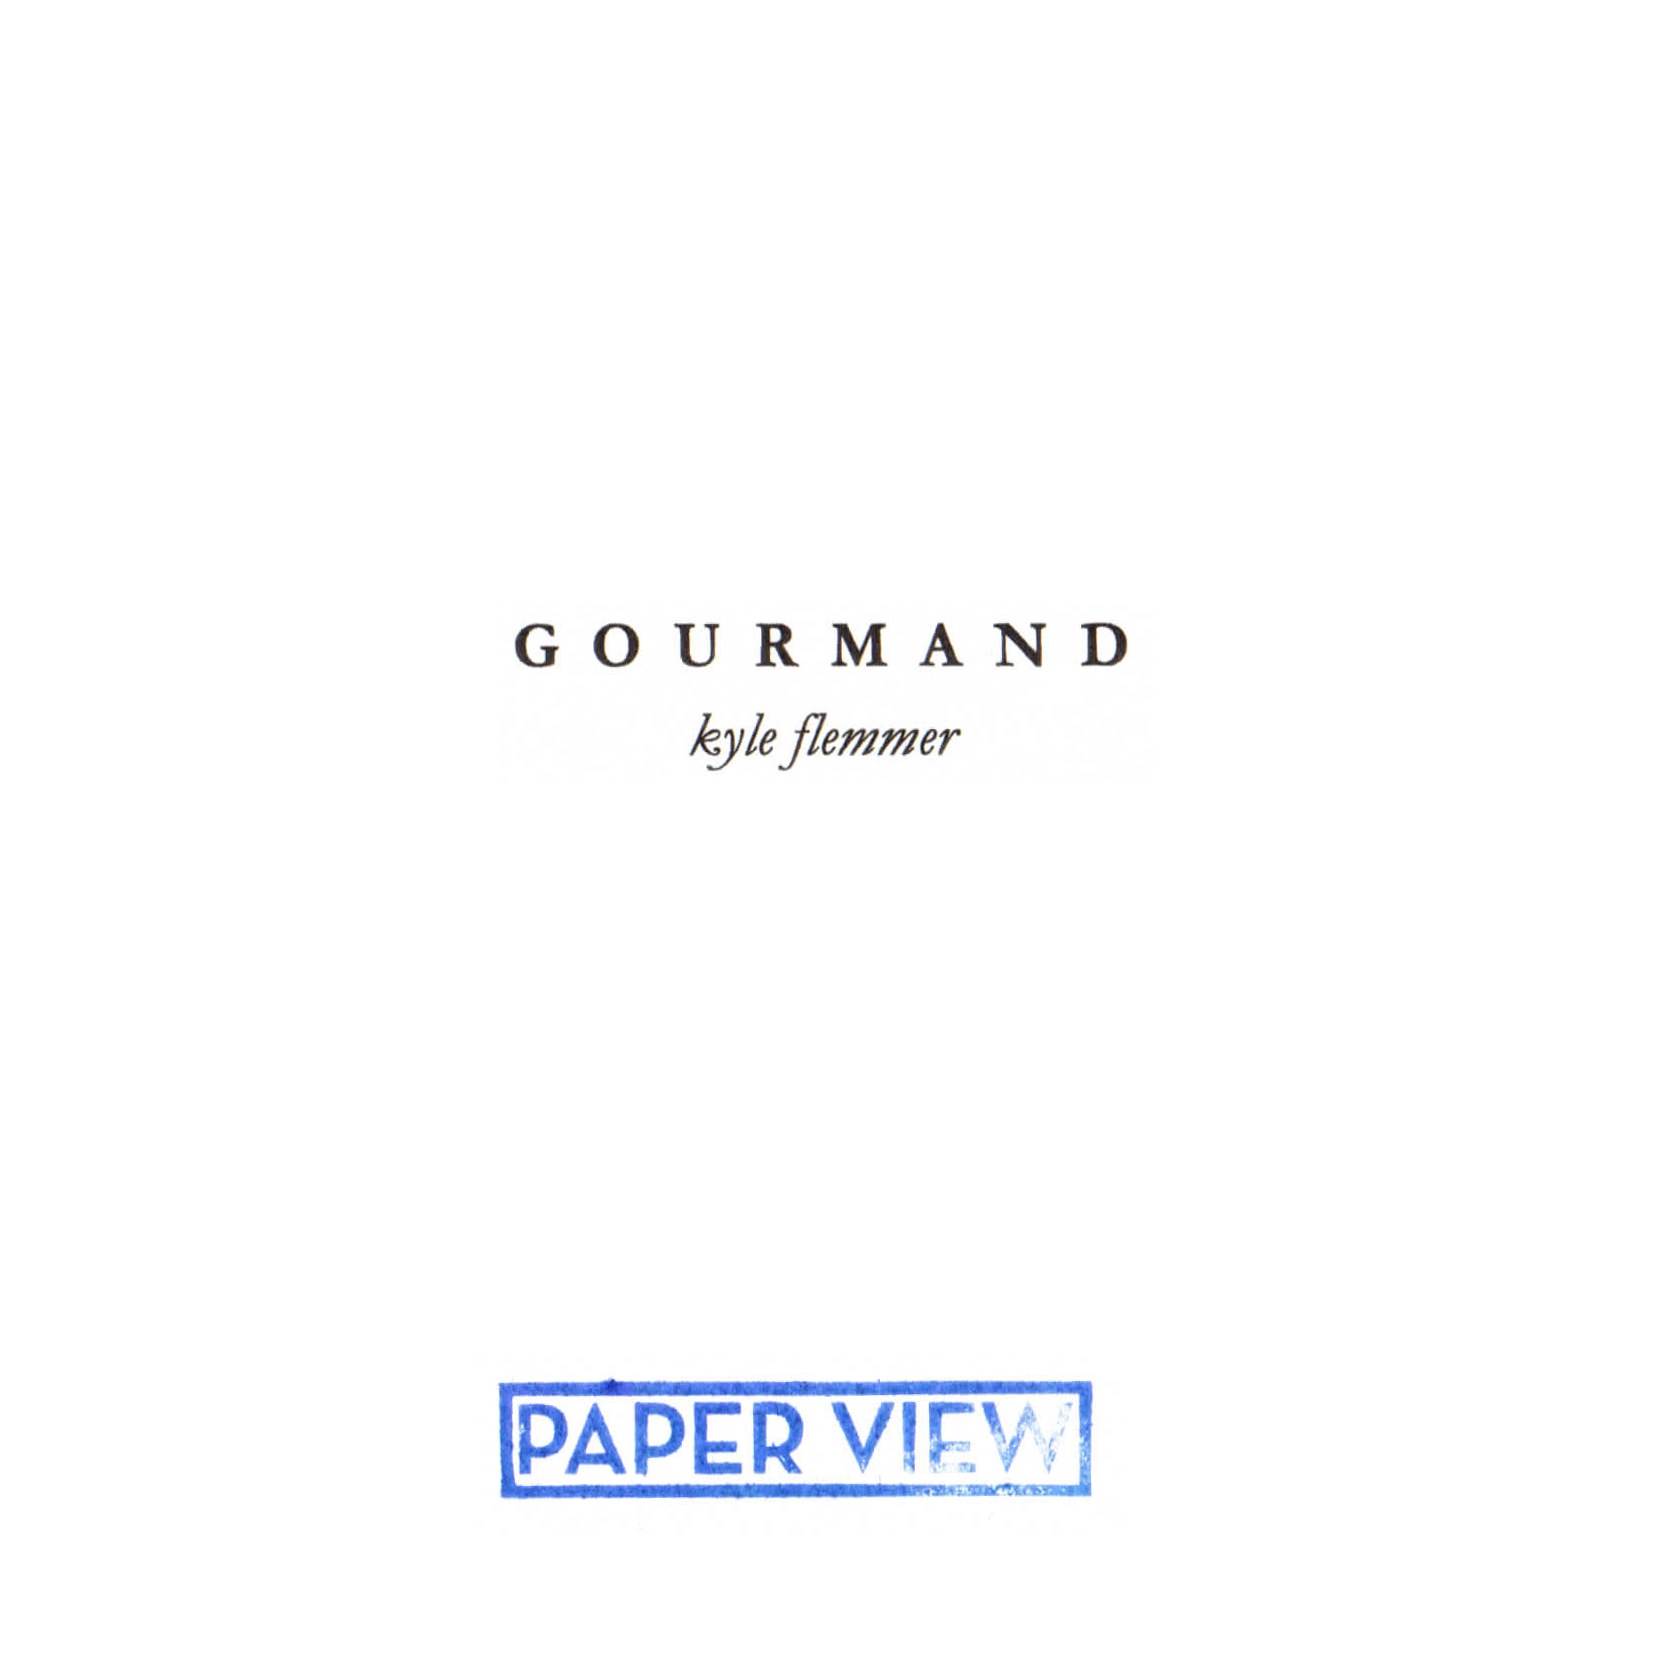 Gourmand chapbook cover